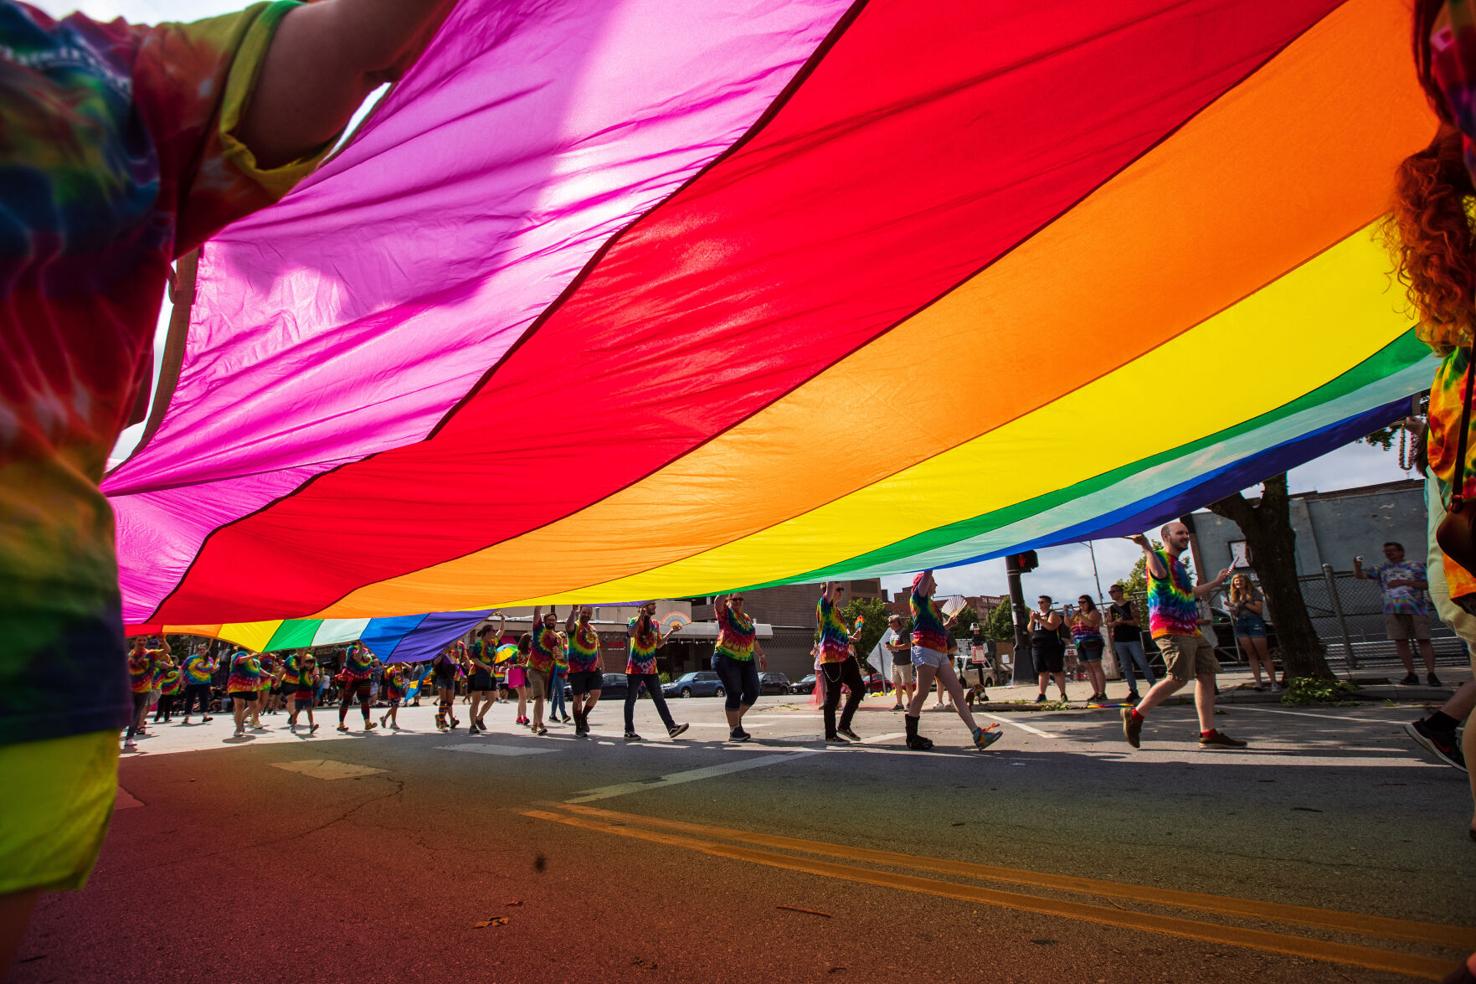 Rainbow flags and pride on full display during Heartland Pride parade